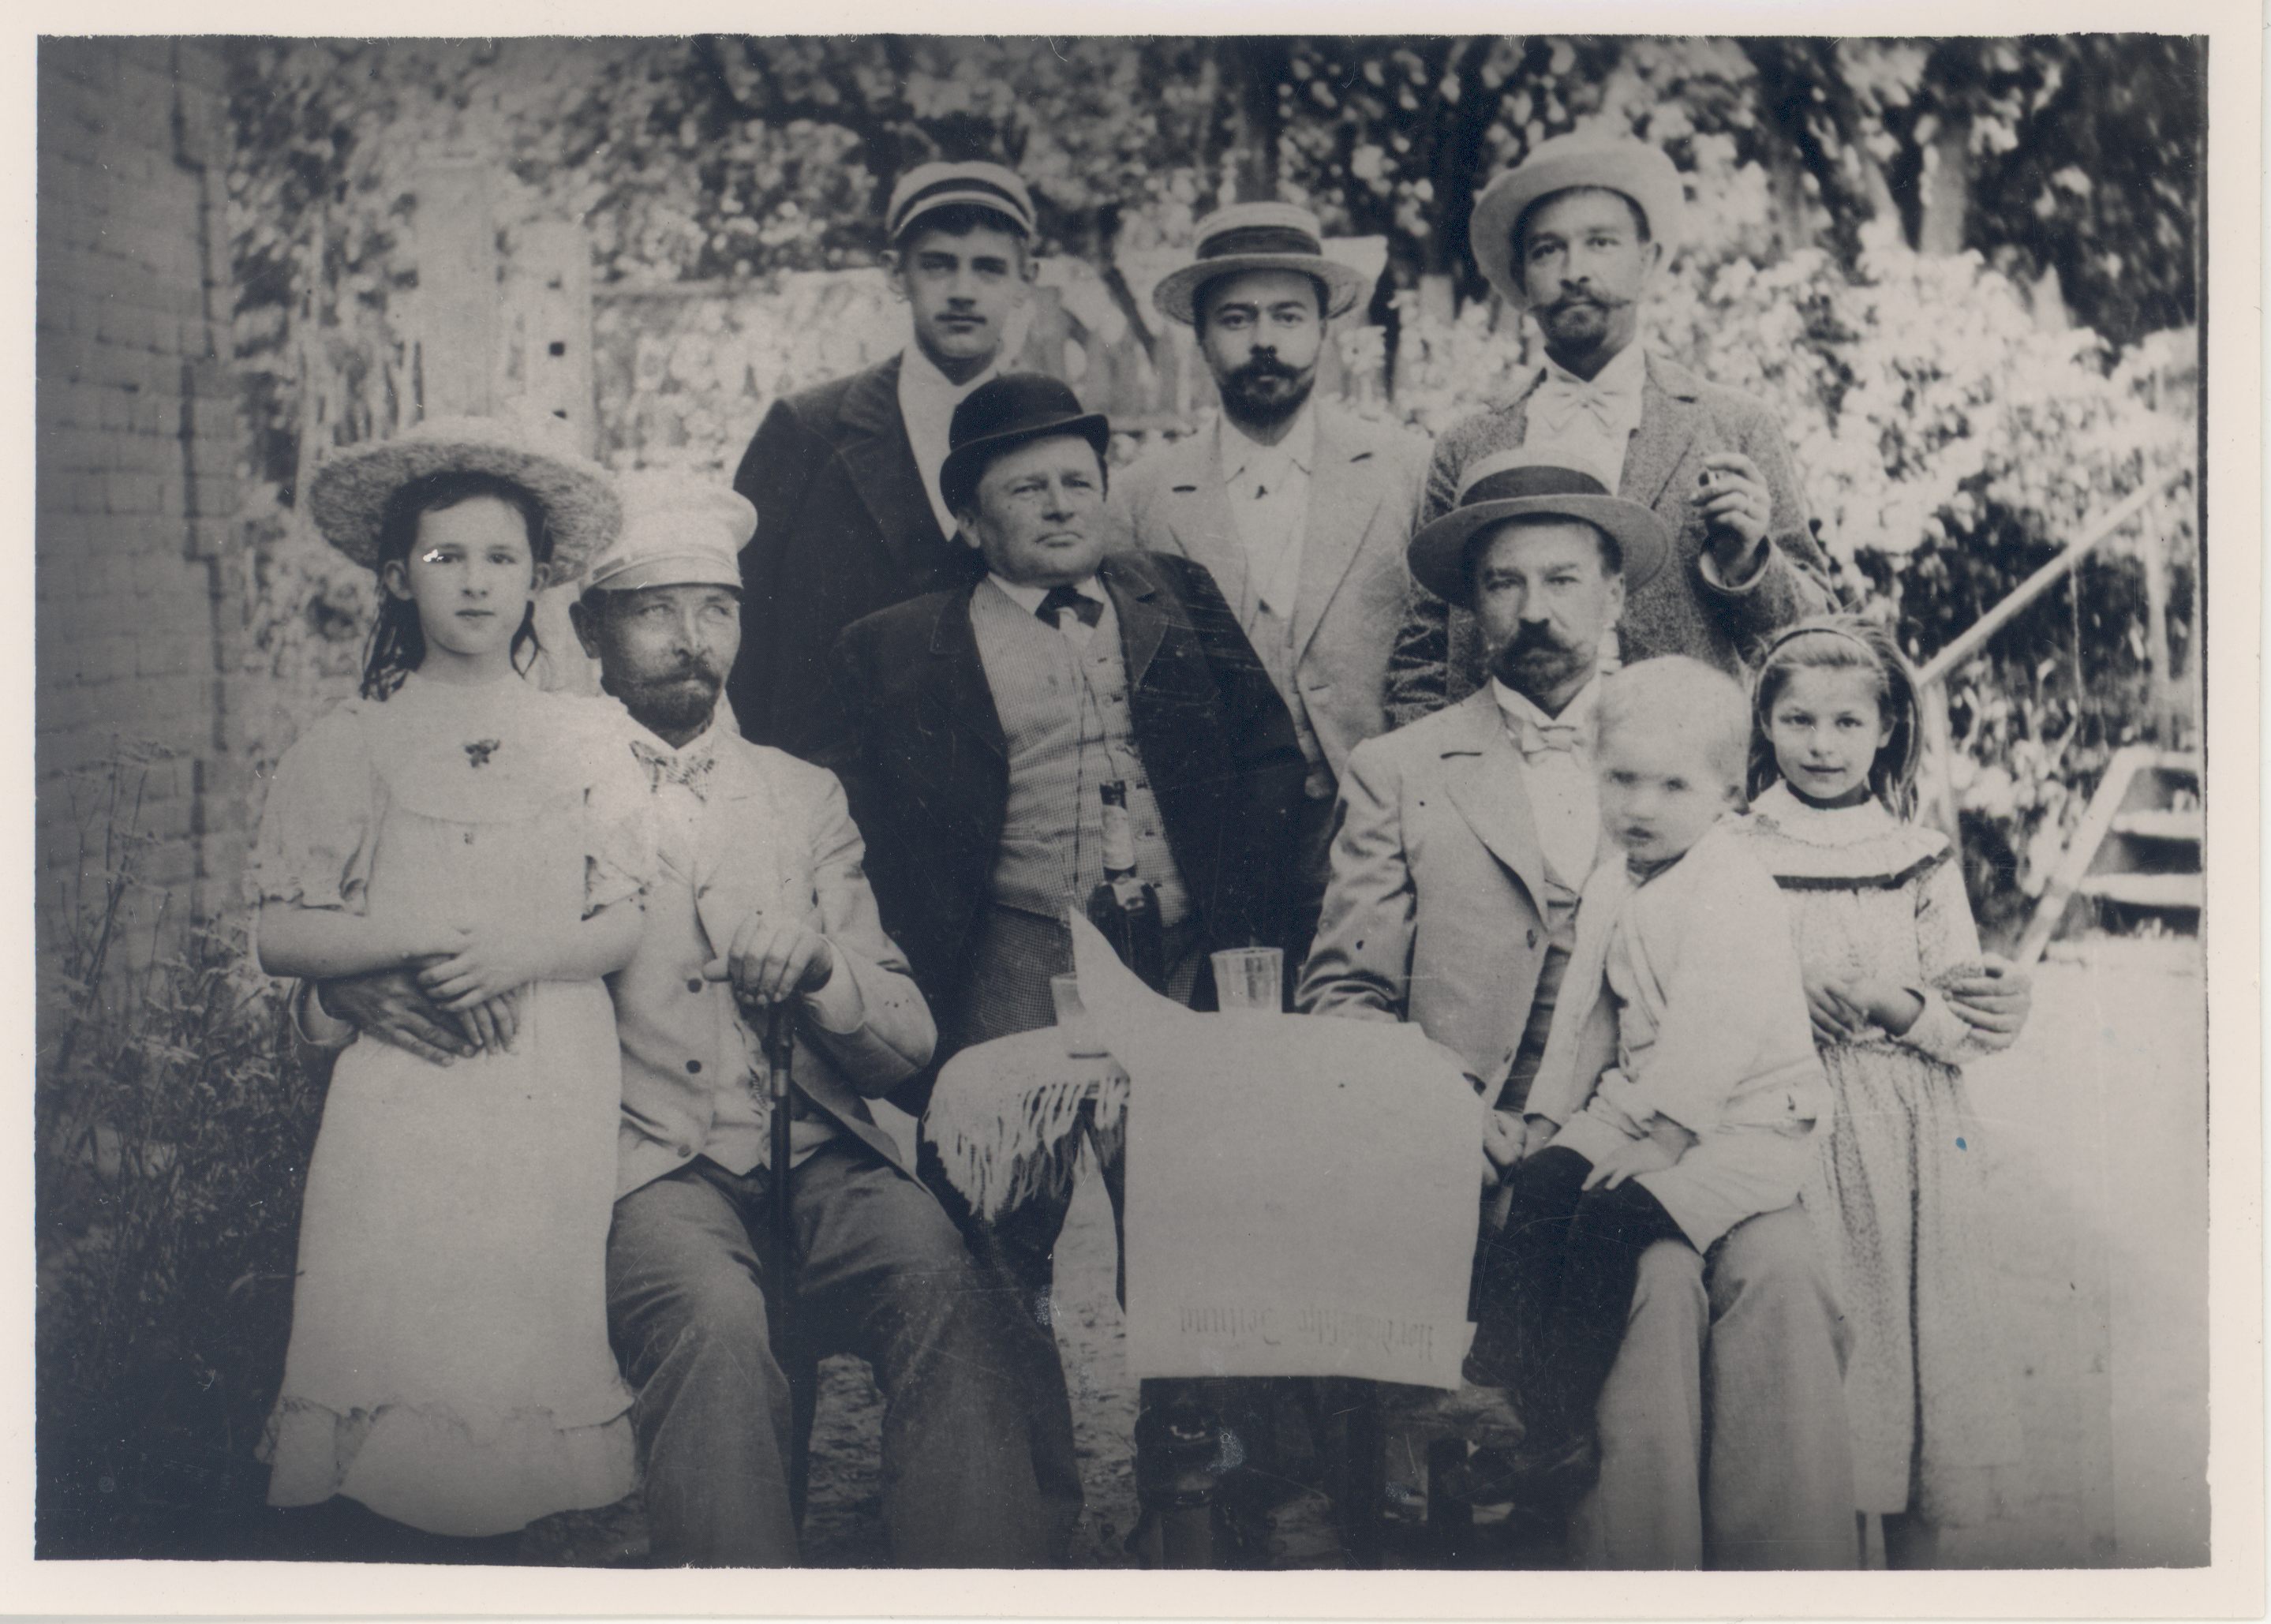 A. Kitzberg (souled with a child) in Kuramaa among the company